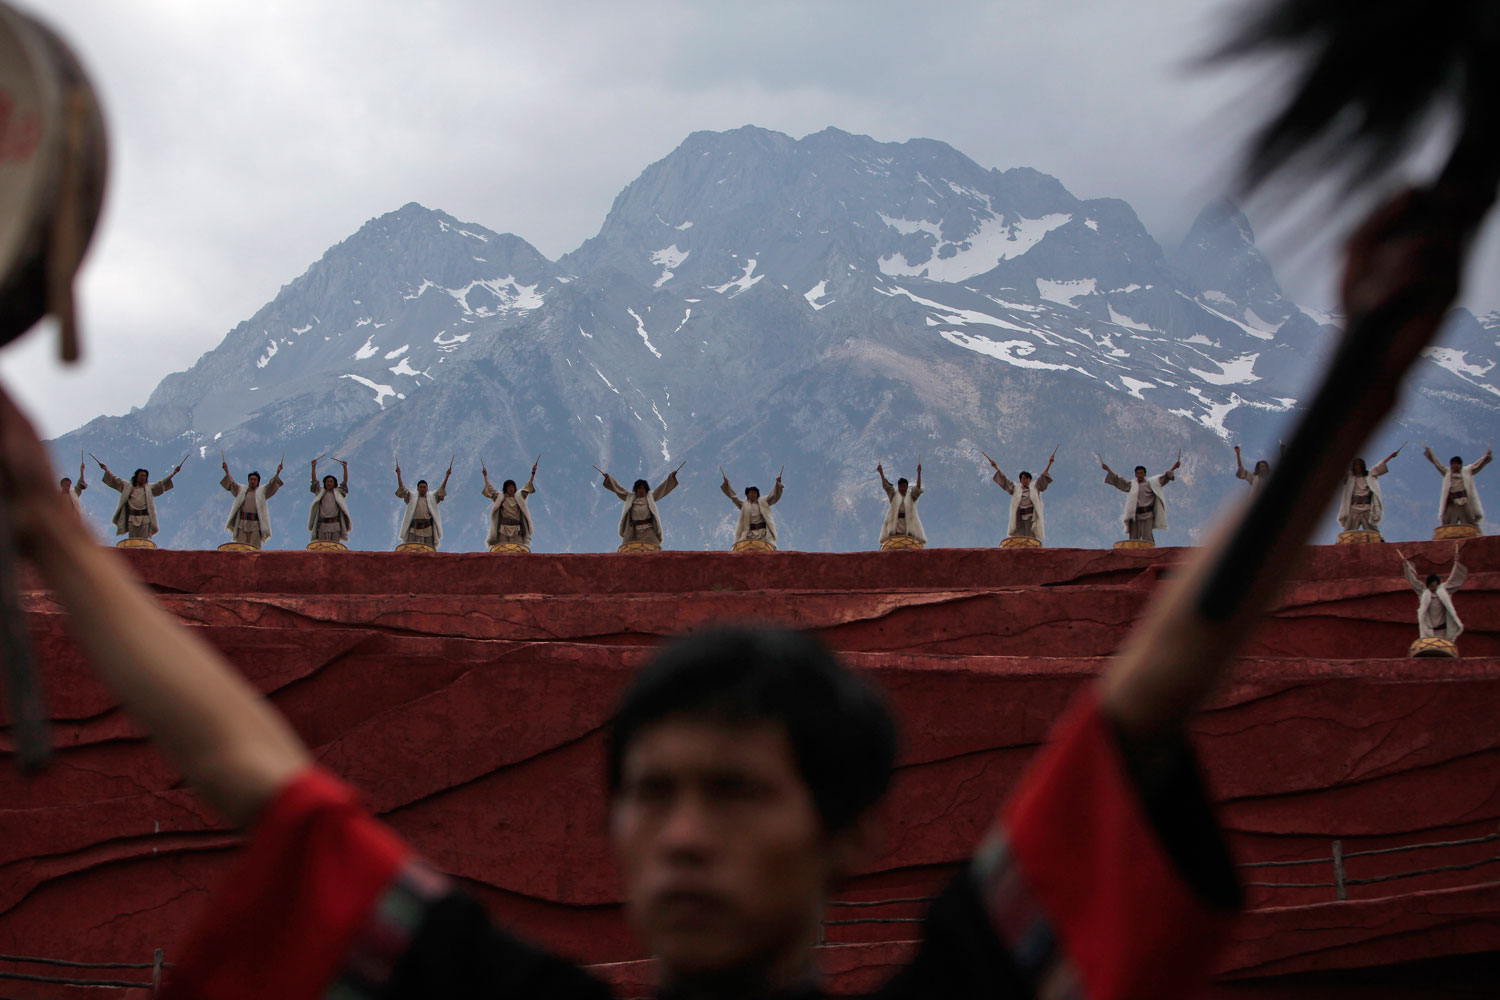 April 5, 2012. Members of the Naxi, Yi and Bai ethnic minorities perform a cultural show entitled Impression Lijiang with Jade Dragon Snow Mountain as a backdrop, in Lijiang, Yunnan Province, China. Directed by Chinese filmmaker Zhang Yimou, the production aims to present the traditions and the lifestyle of these minorities.